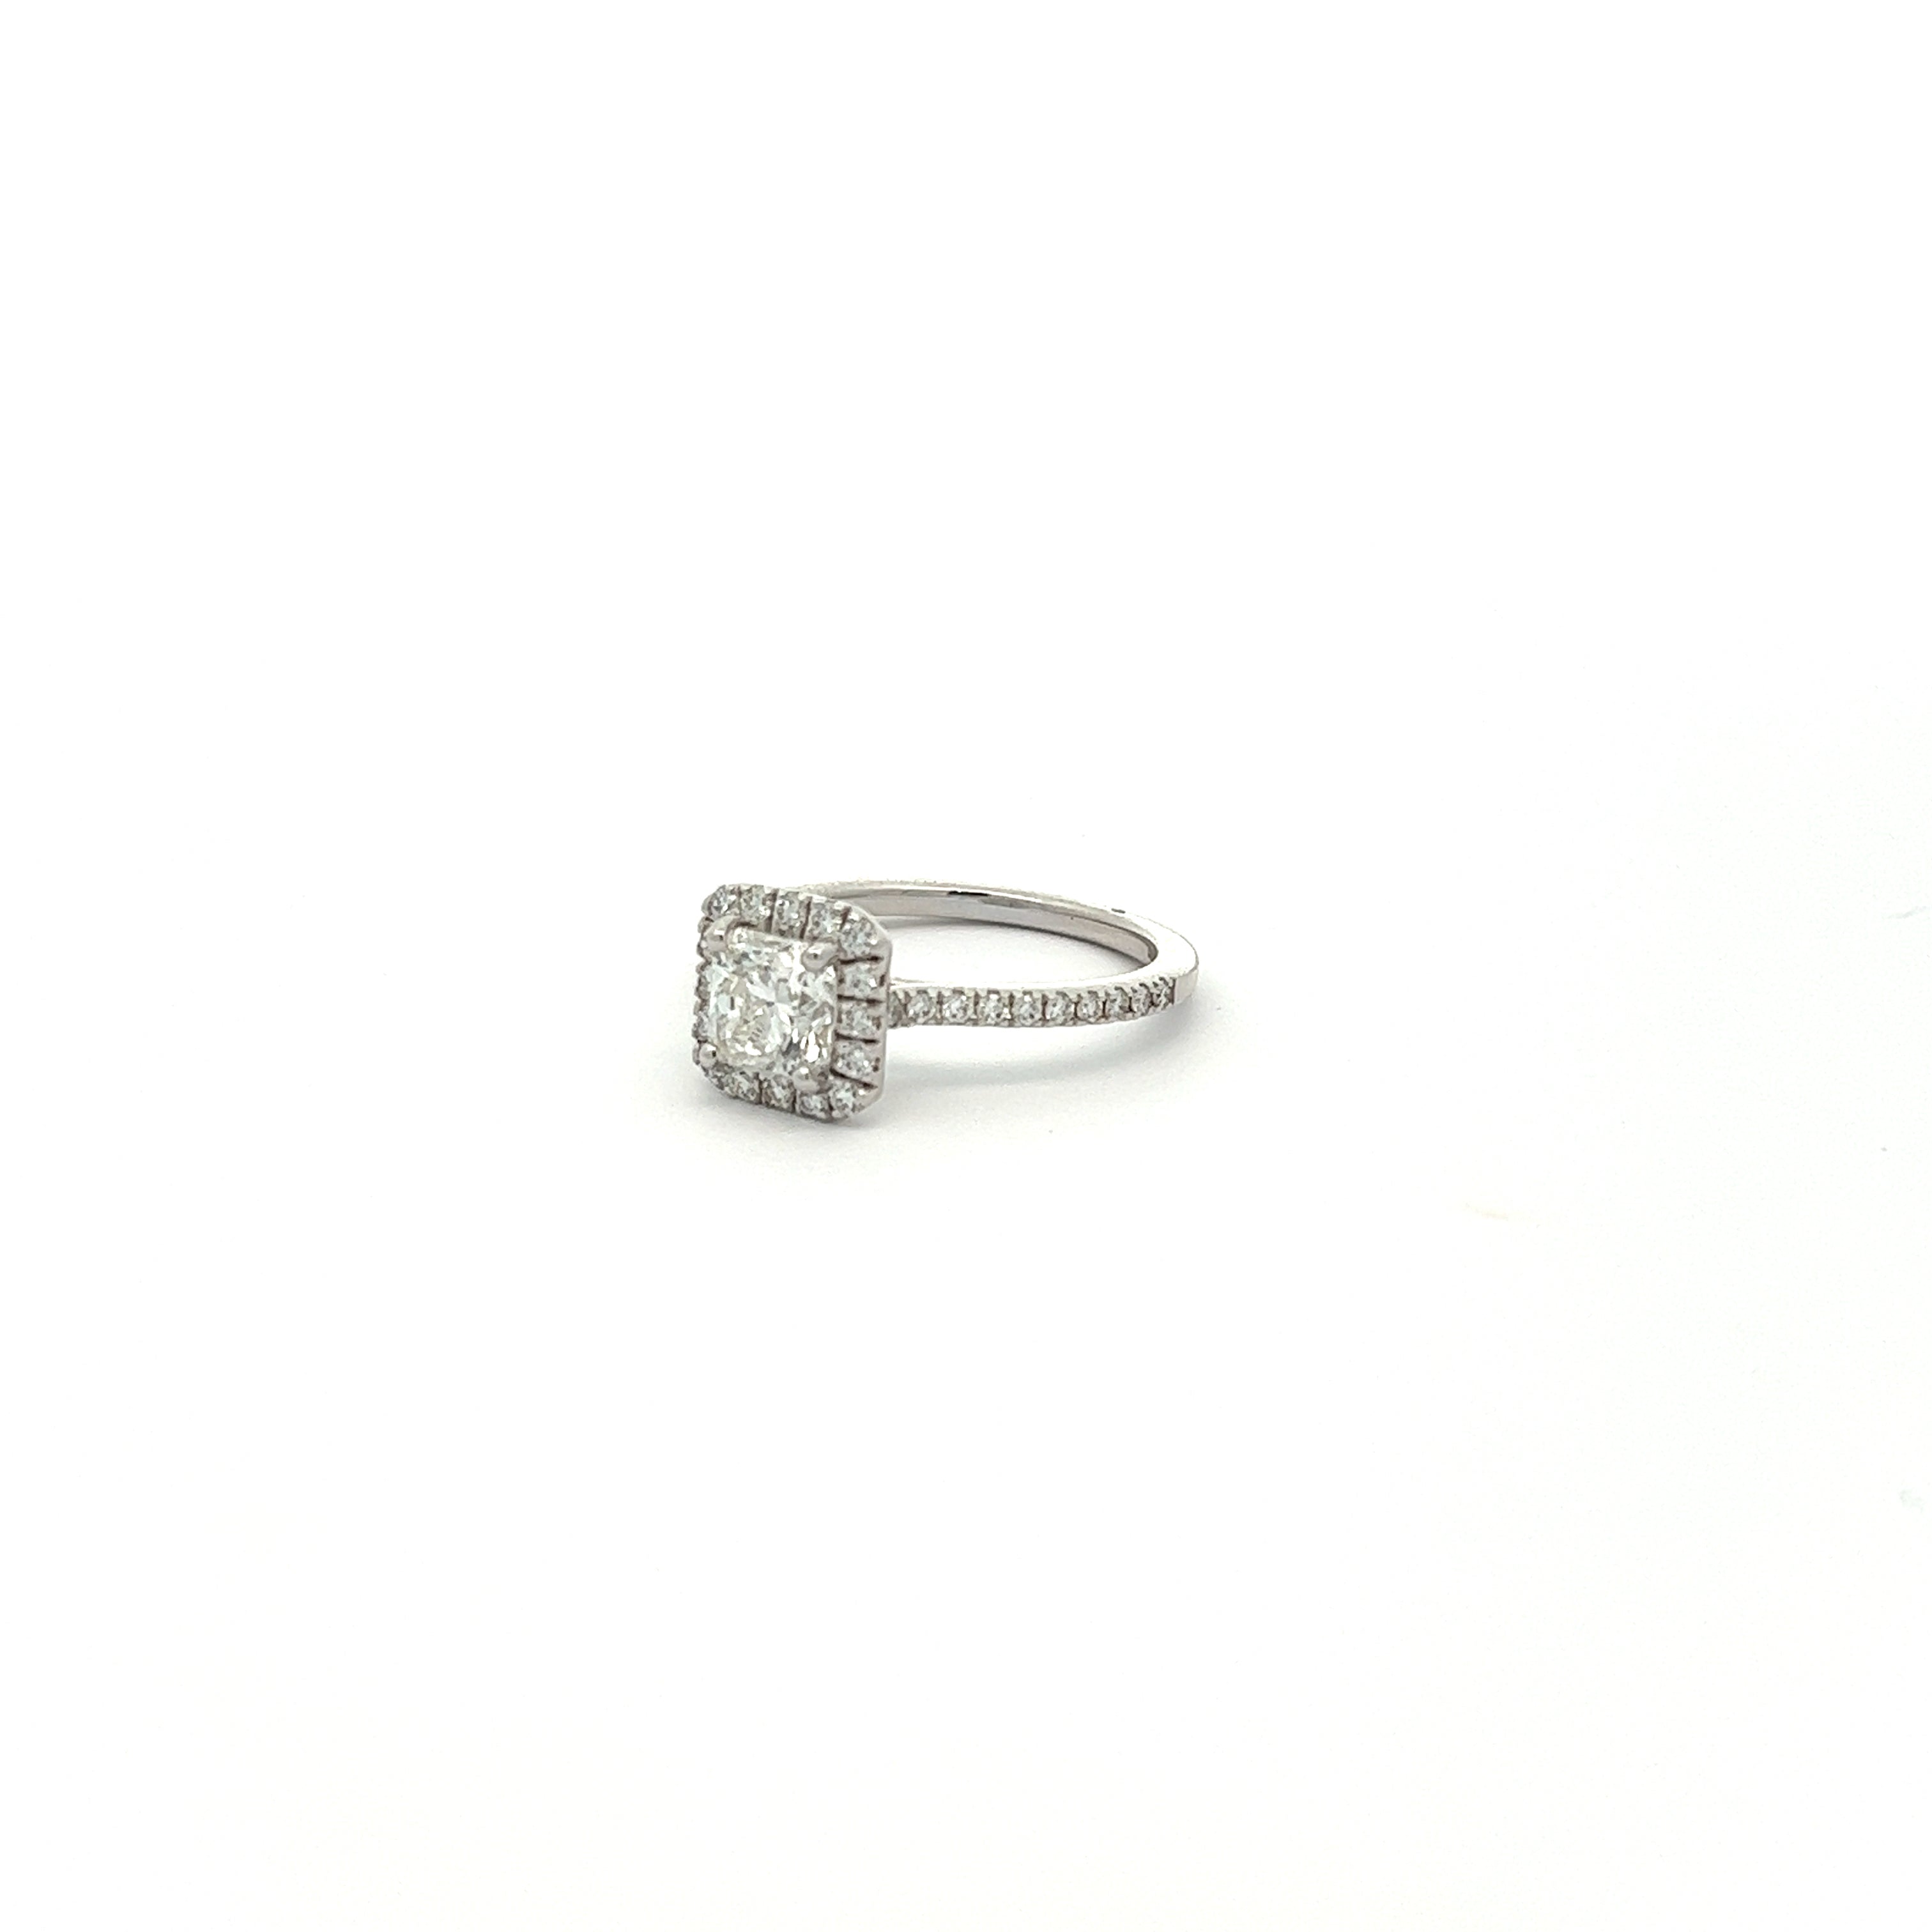 The Terry 18k White Gold Radiant Cut with Halo Diamond Engagement RIng